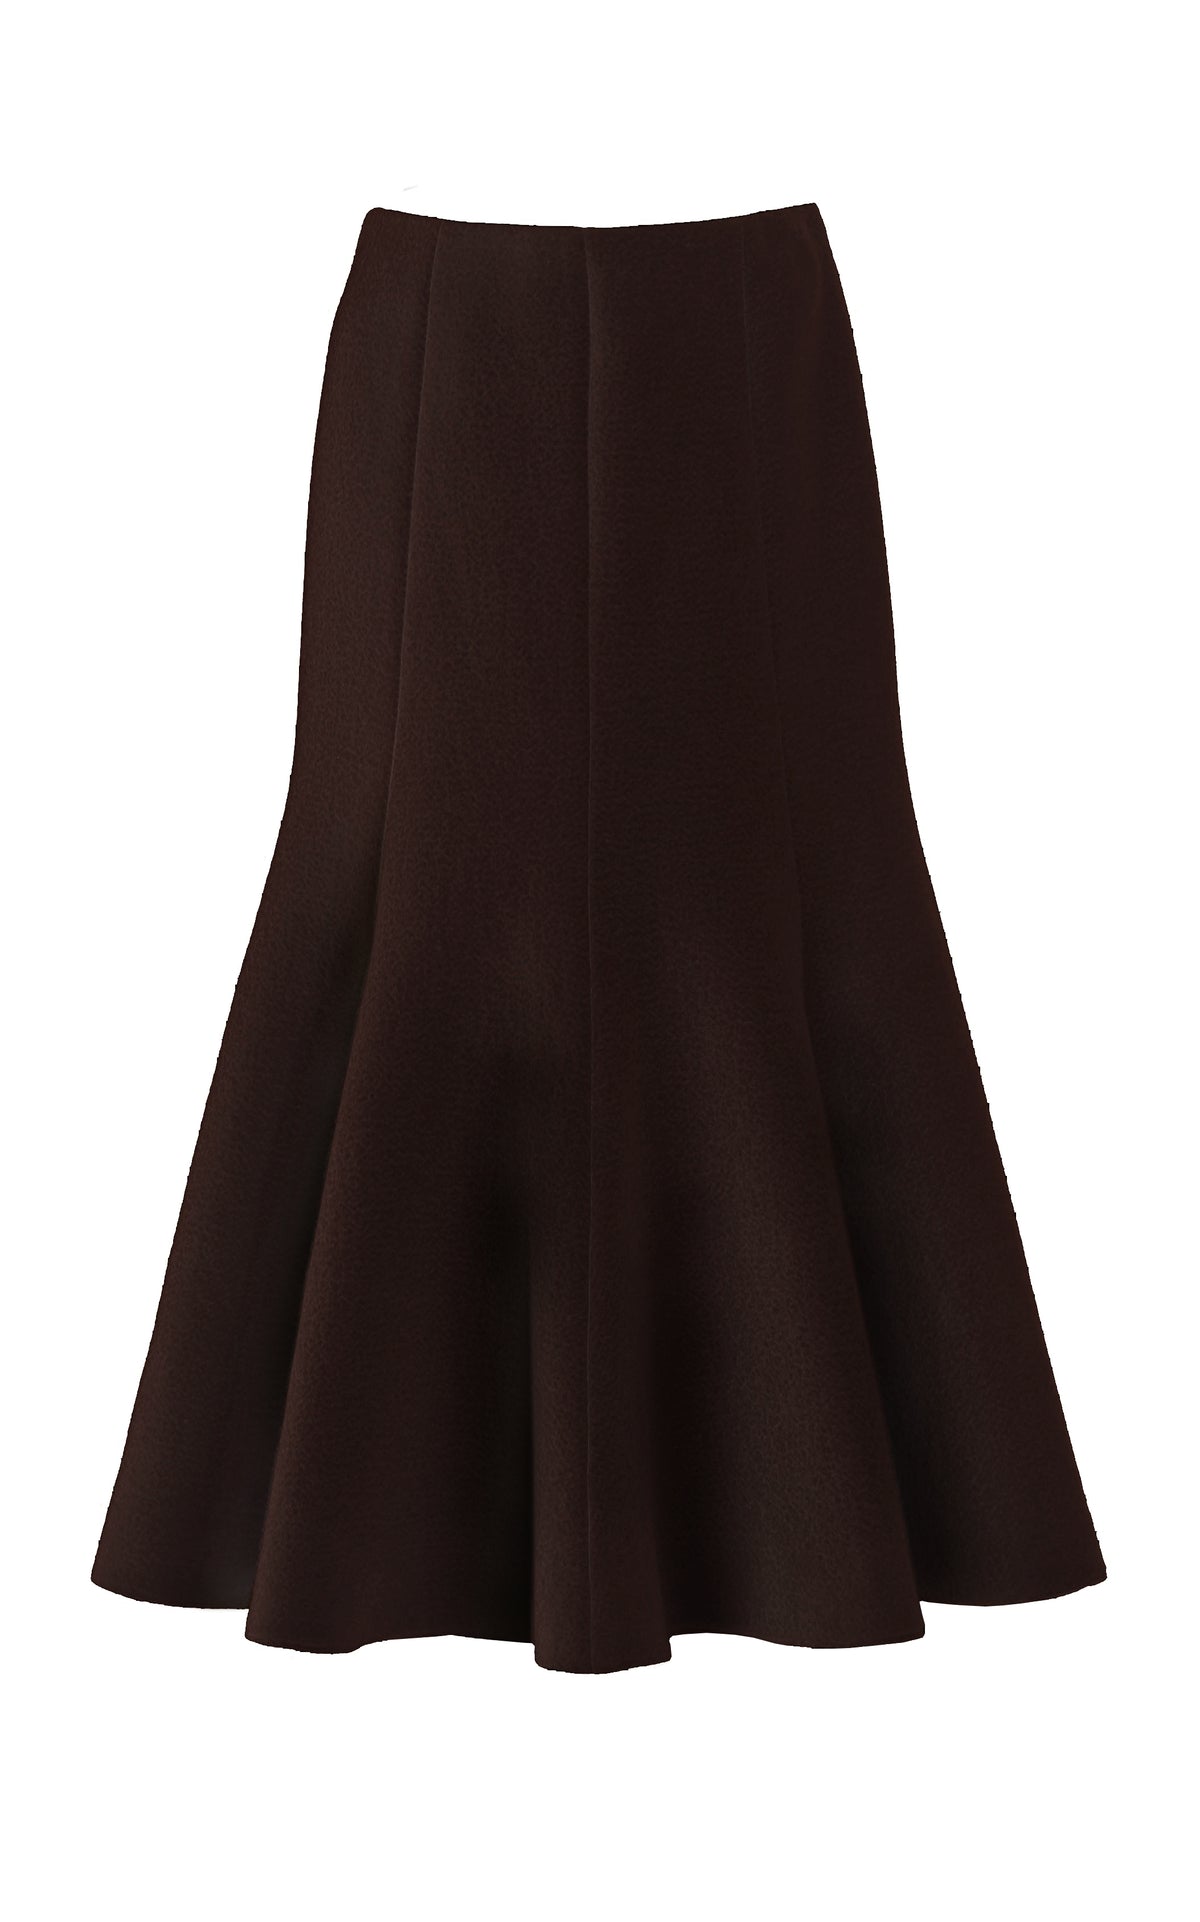 Amy Skirt in Chocolate Recycled Cashmere Felt